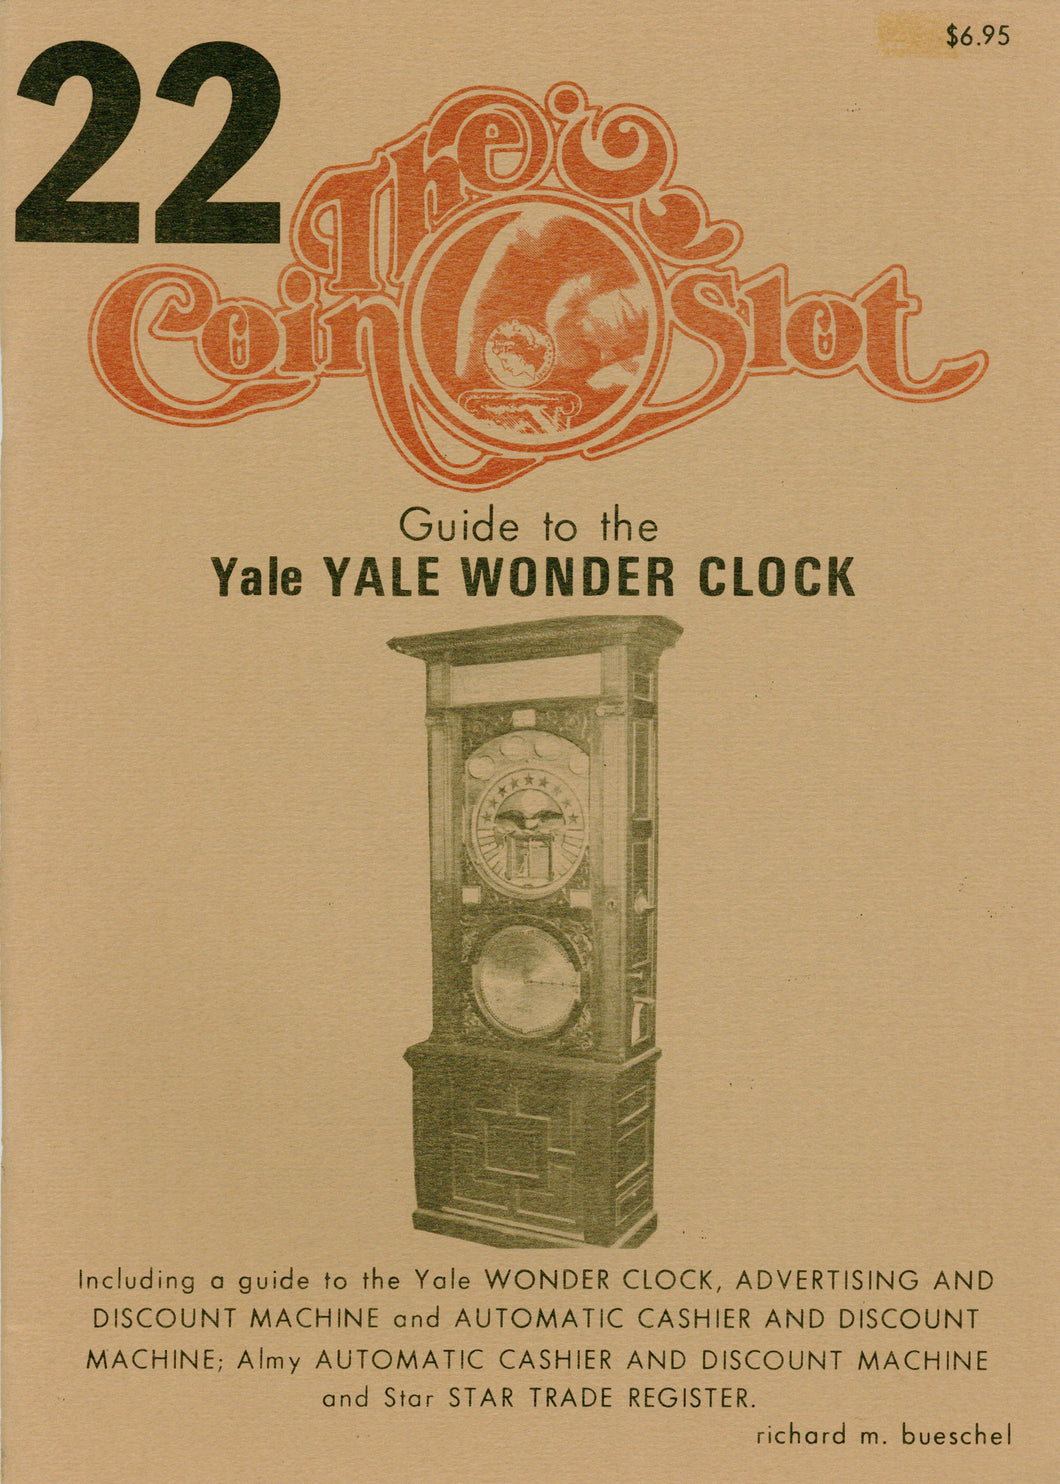 Coin Slot #22. Guide to the Yale Wonder Clock